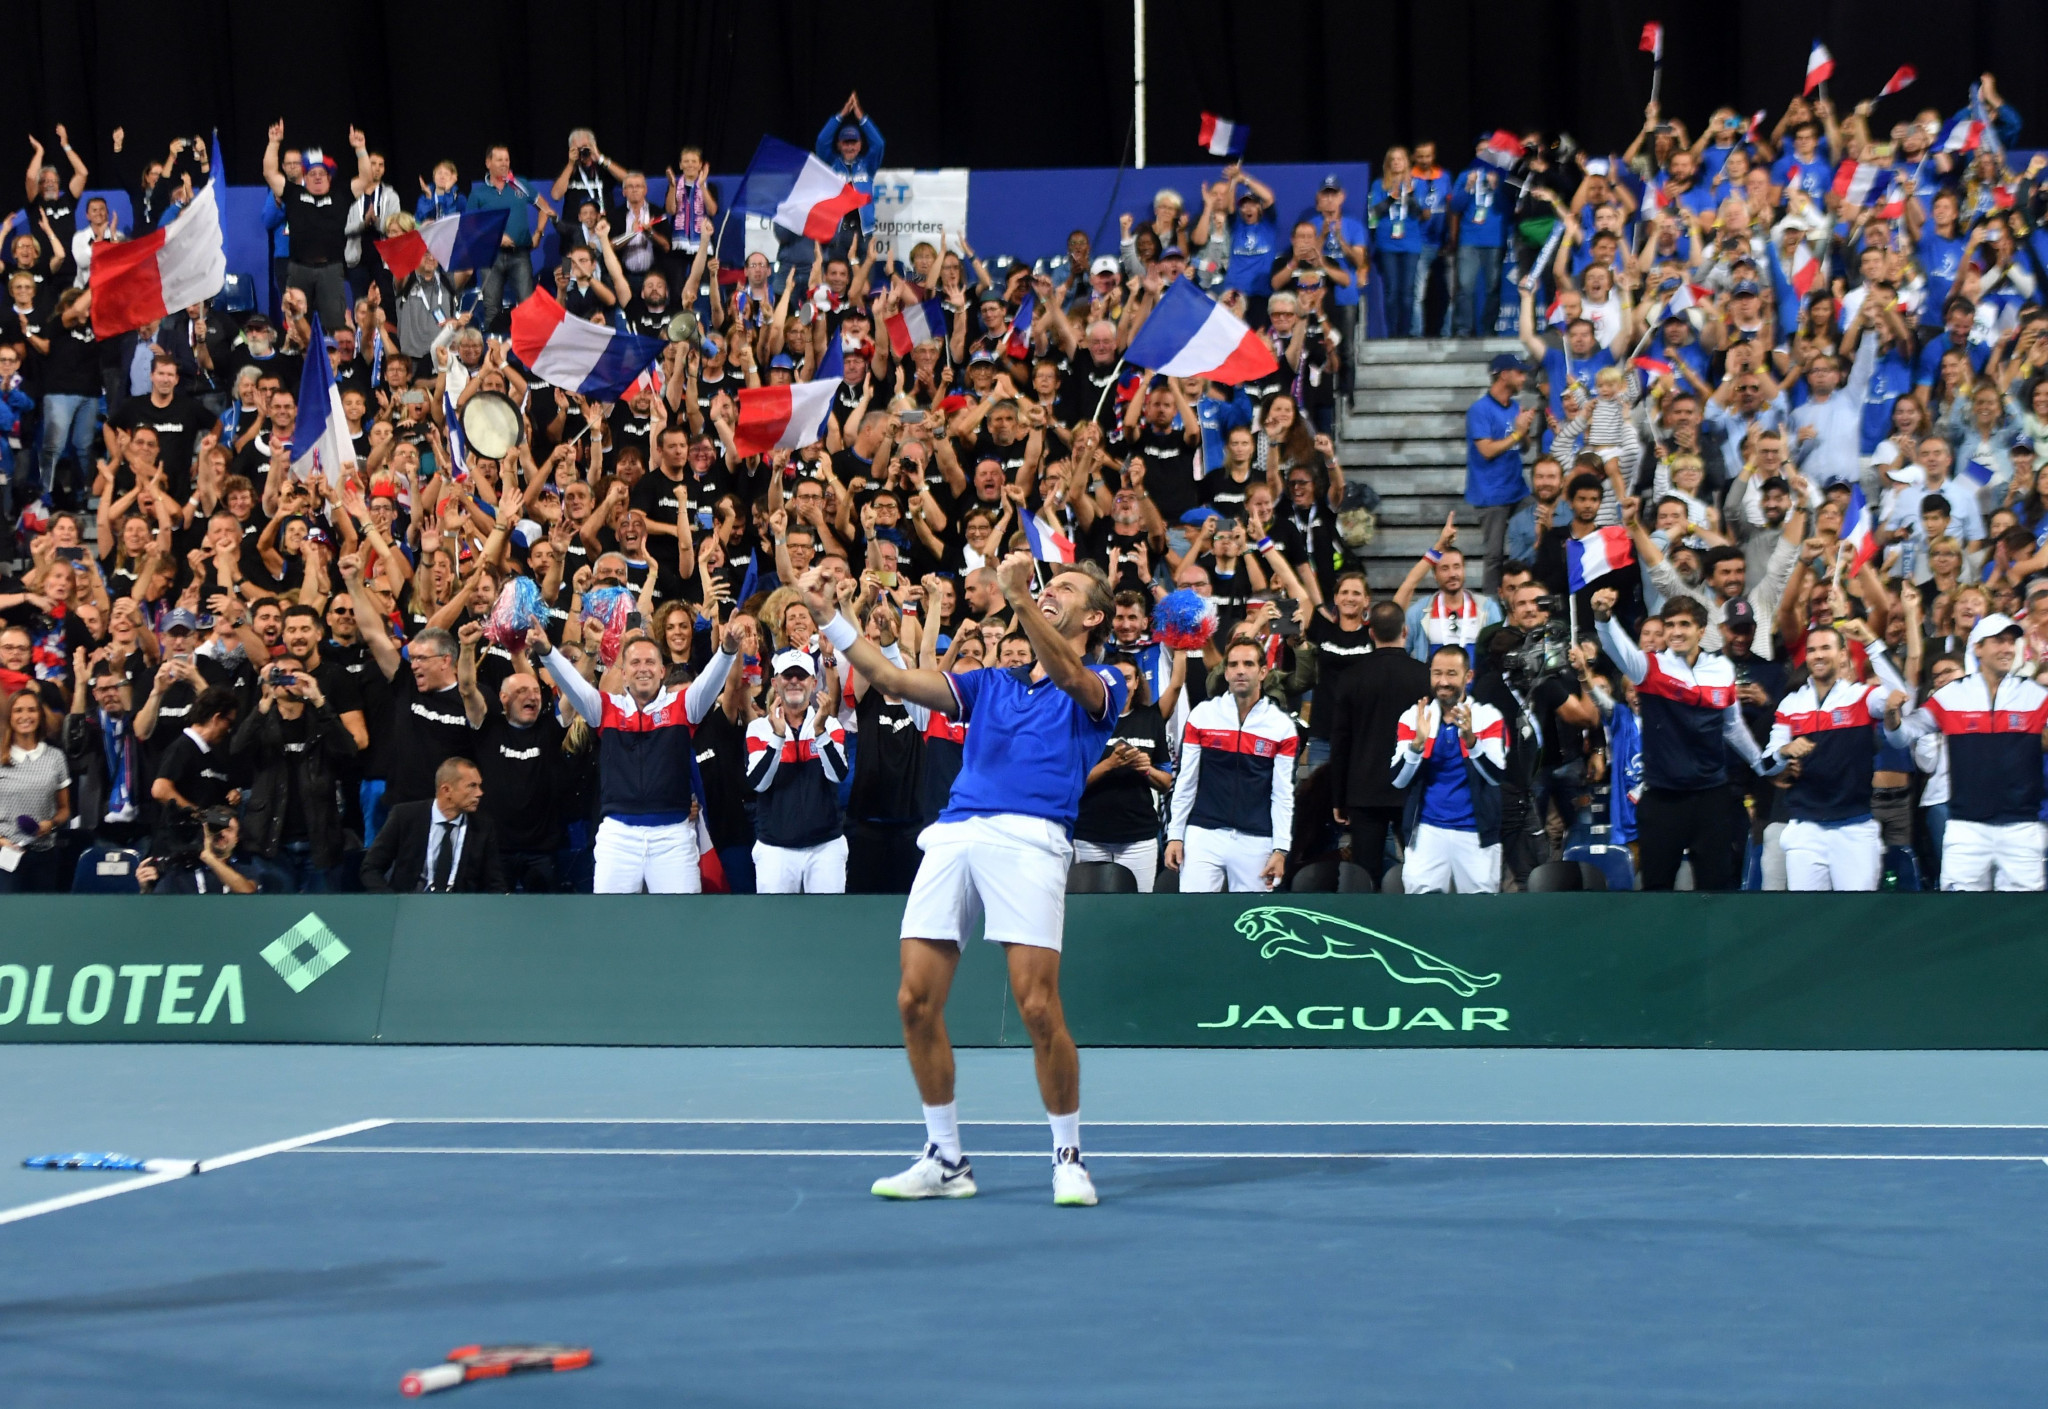 France seal place in Davis Cup final as United States win doubles epic to keep hopes alive